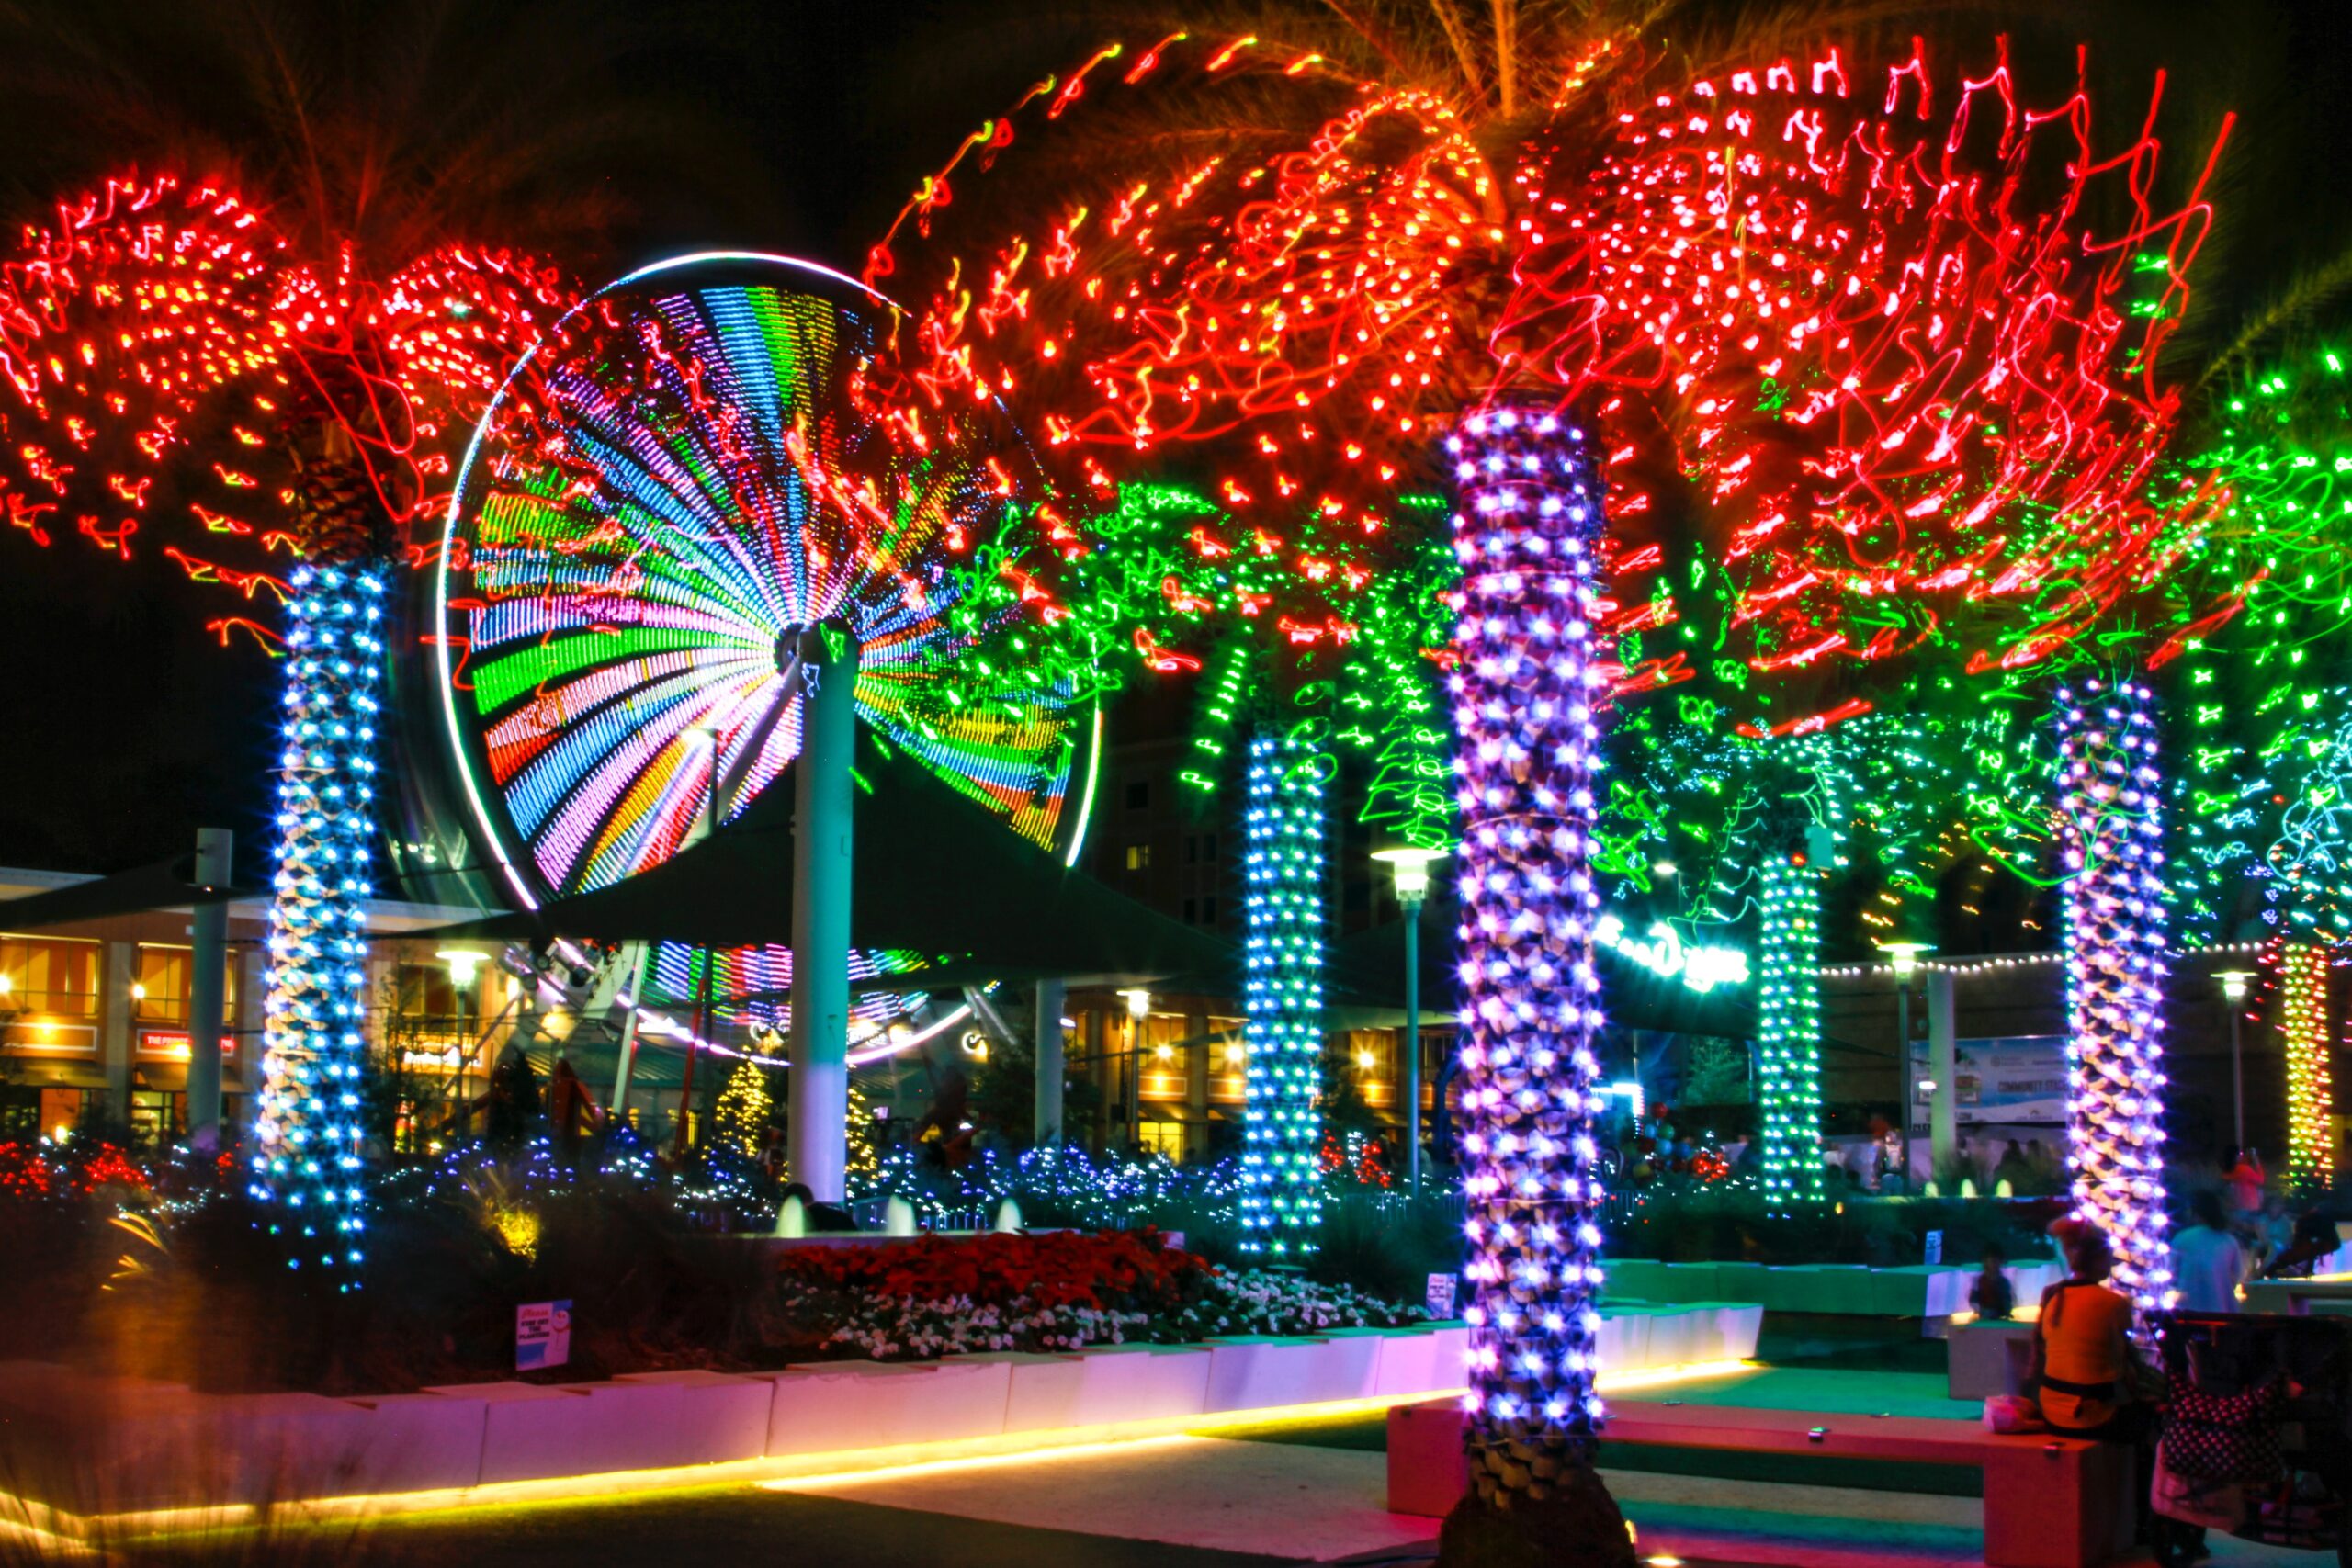 Spending Christmas in Hawaii is a popular choice for travelers. Learn about the number of activities that Hawaii’s islands offer. 
Pictured: tropical palm trees with Christmas lights lighting up the night at a resort 